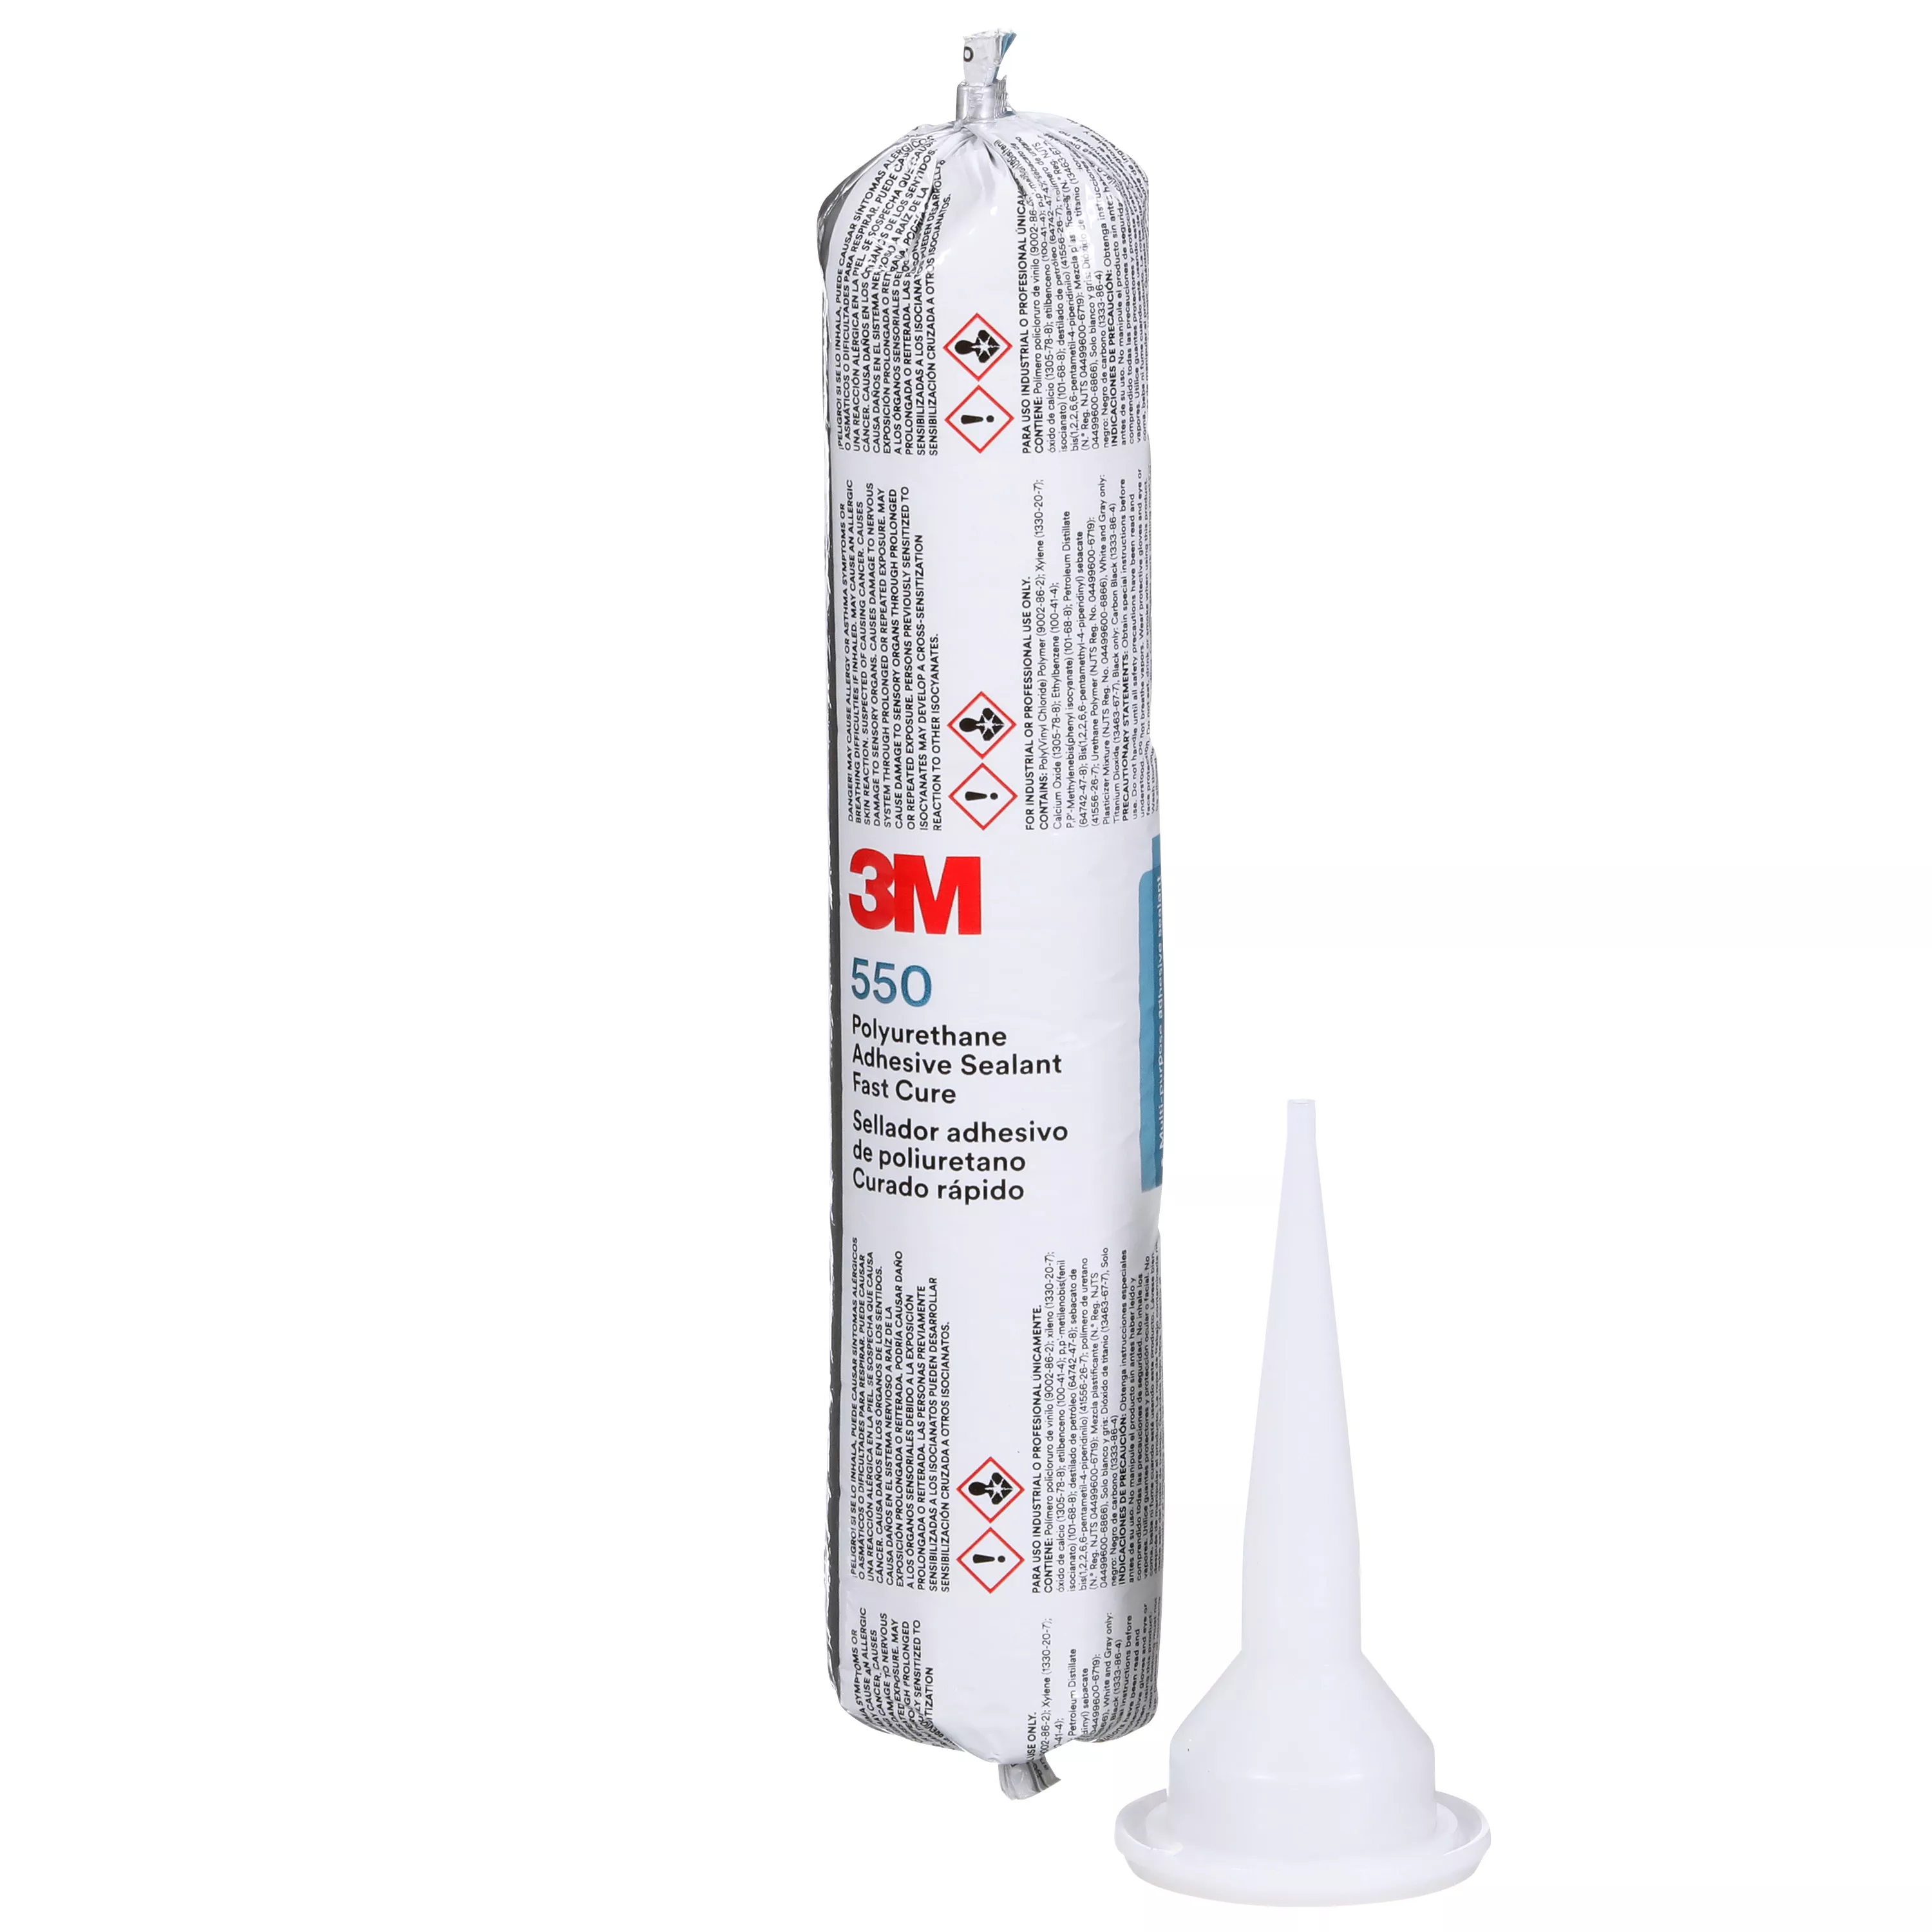 3M™ Polyurethane Adhesive Sealant 550FC Fast Cure, White, 400 mL Sausage
Pack, 12/Case